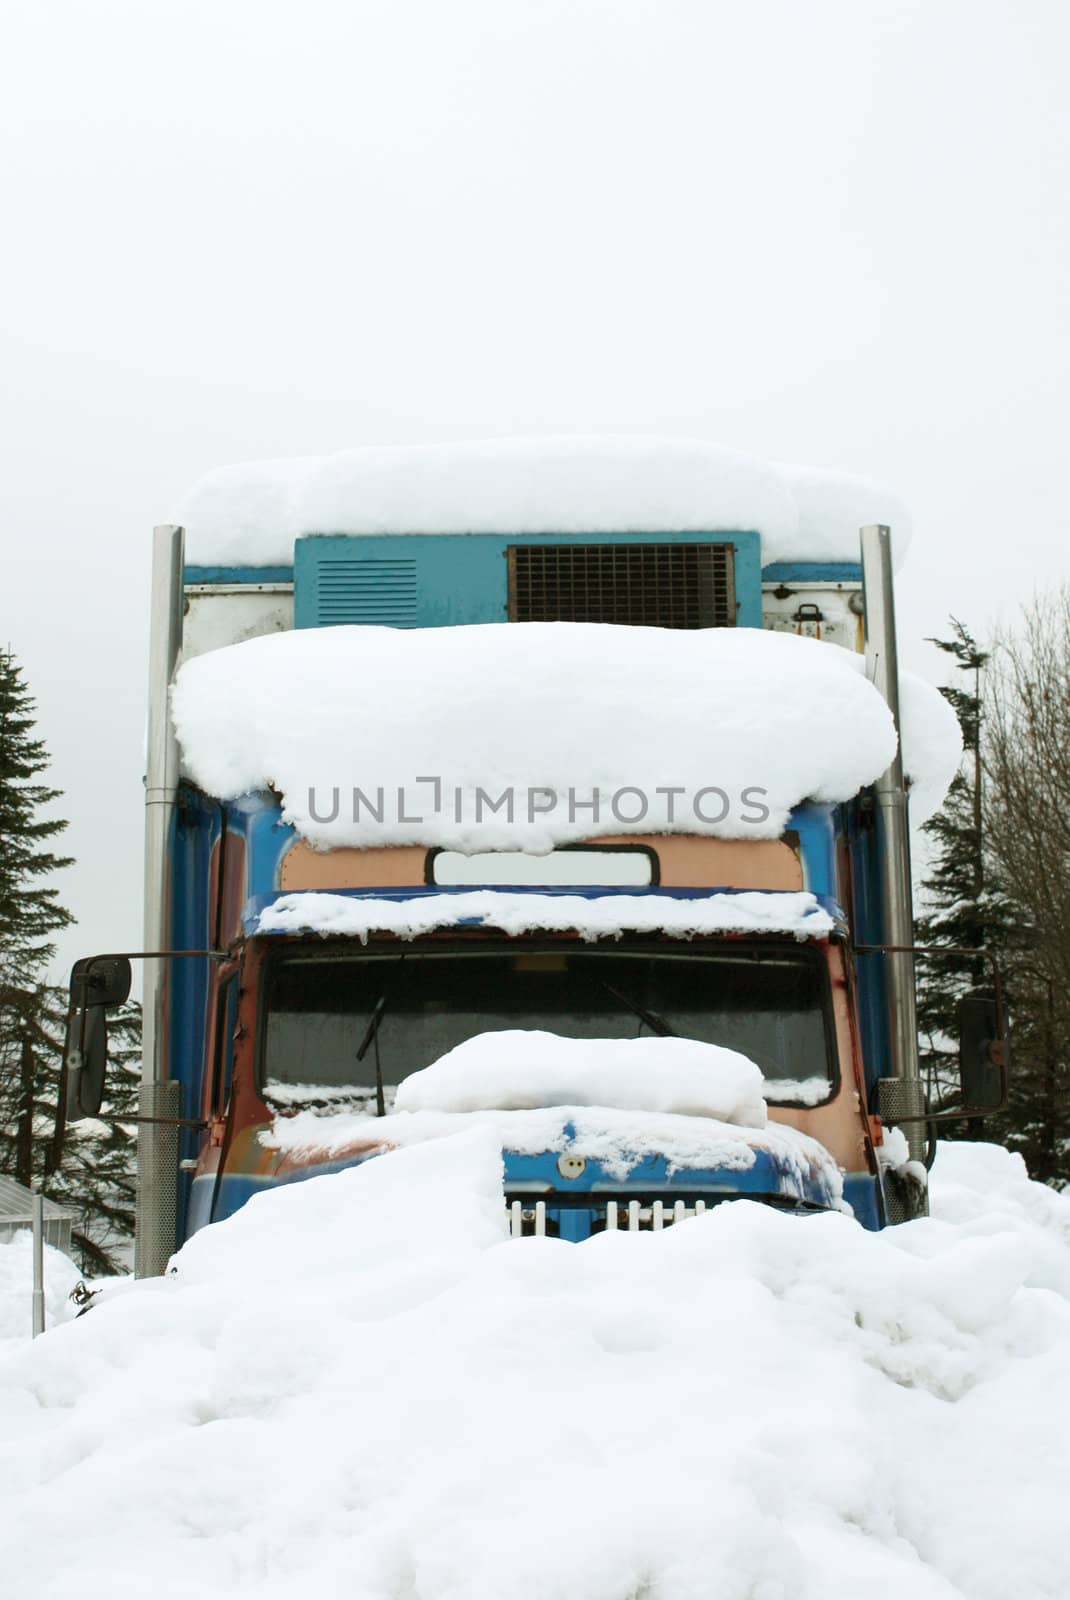 Old derelict blue truck covered in snow